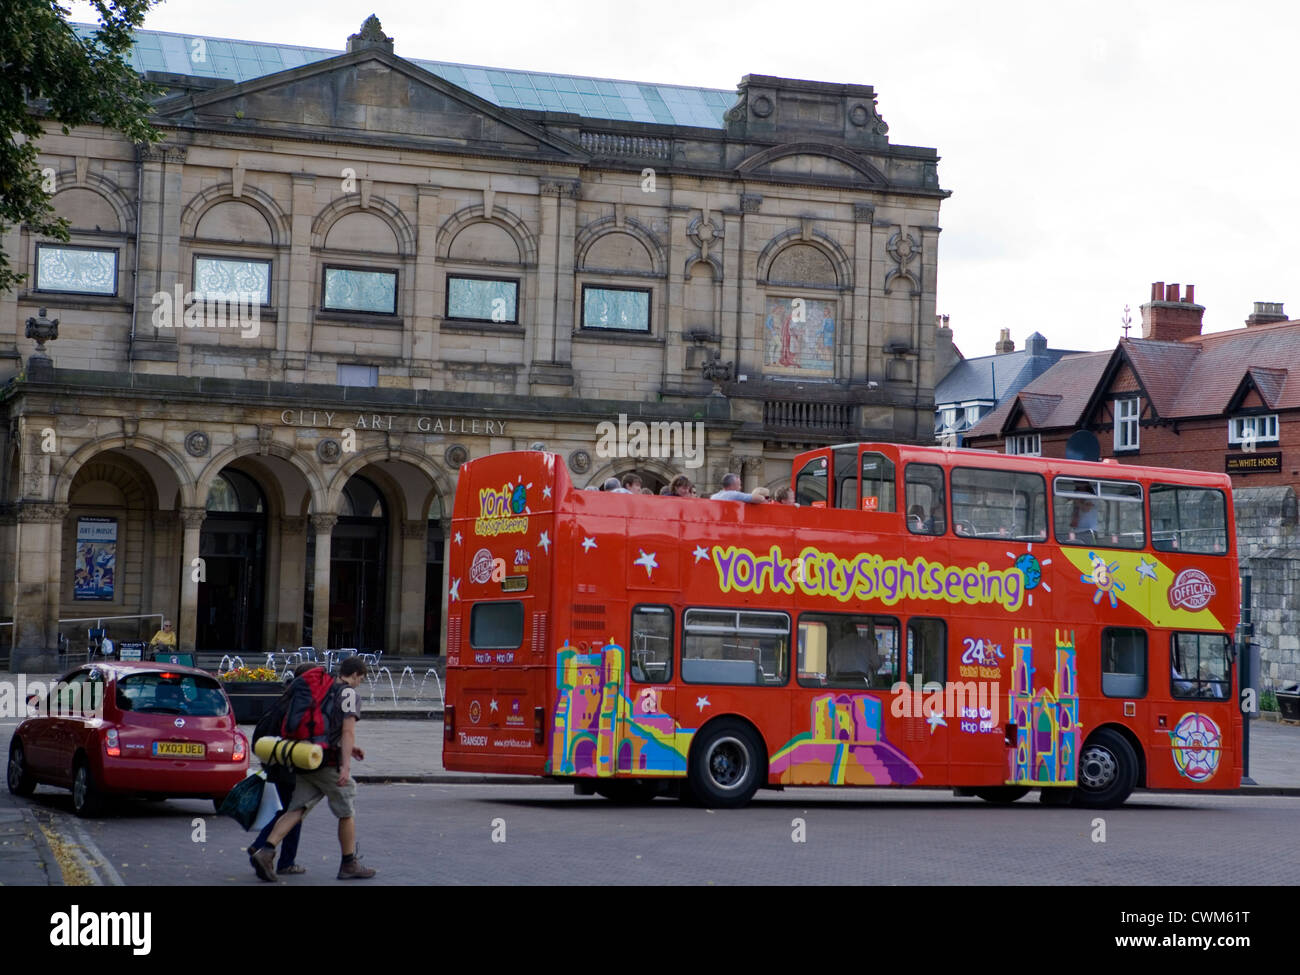 York sight seeing bus outside city art gallery Stock Photo